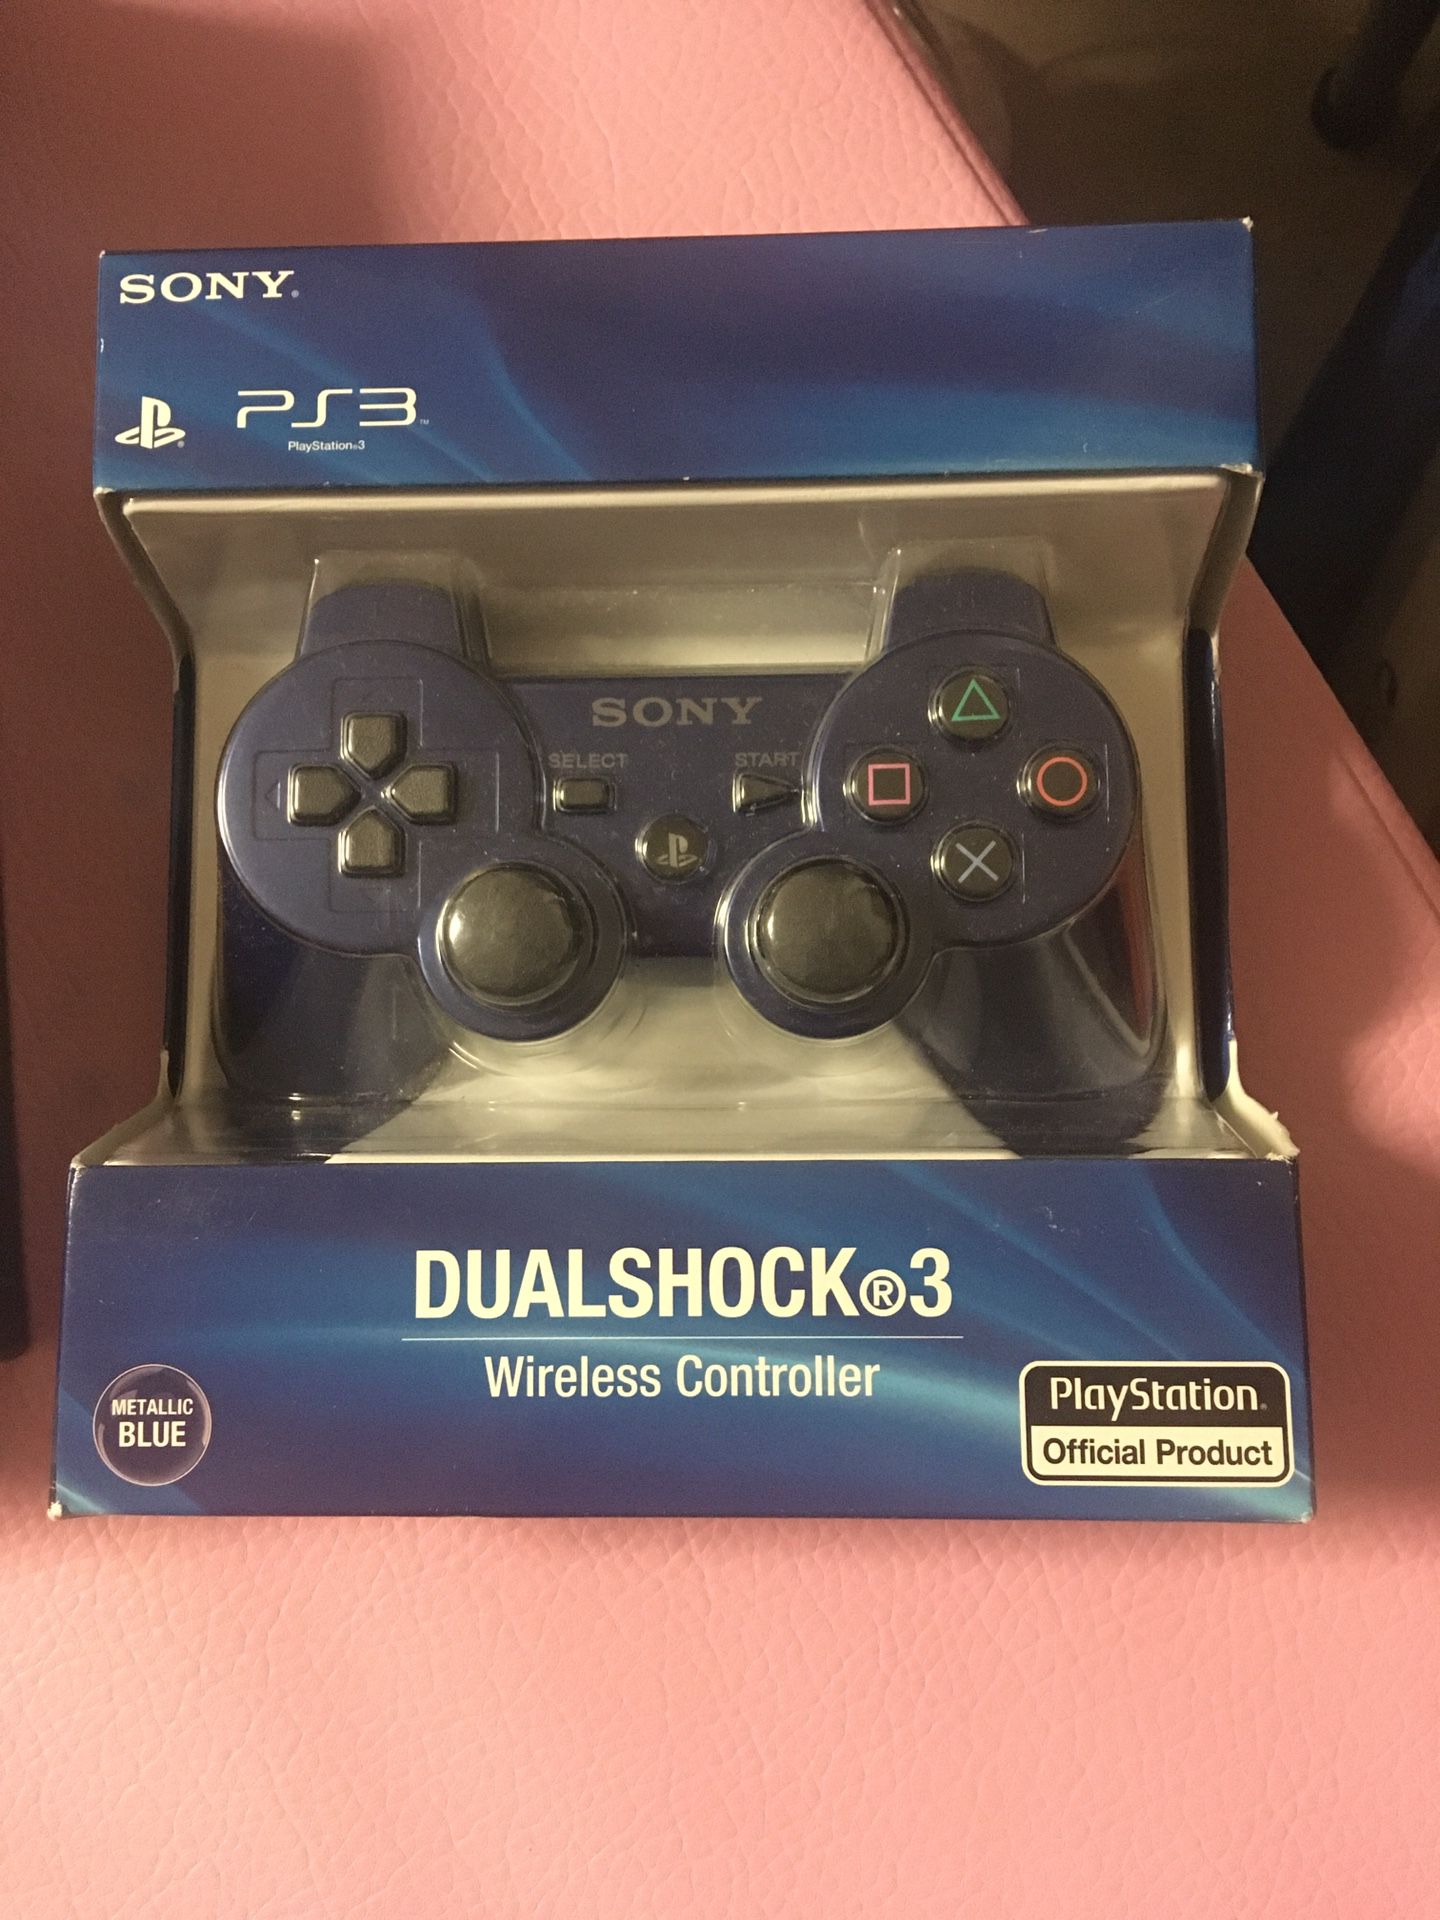 PS 3 dual shock 3 wireless controller